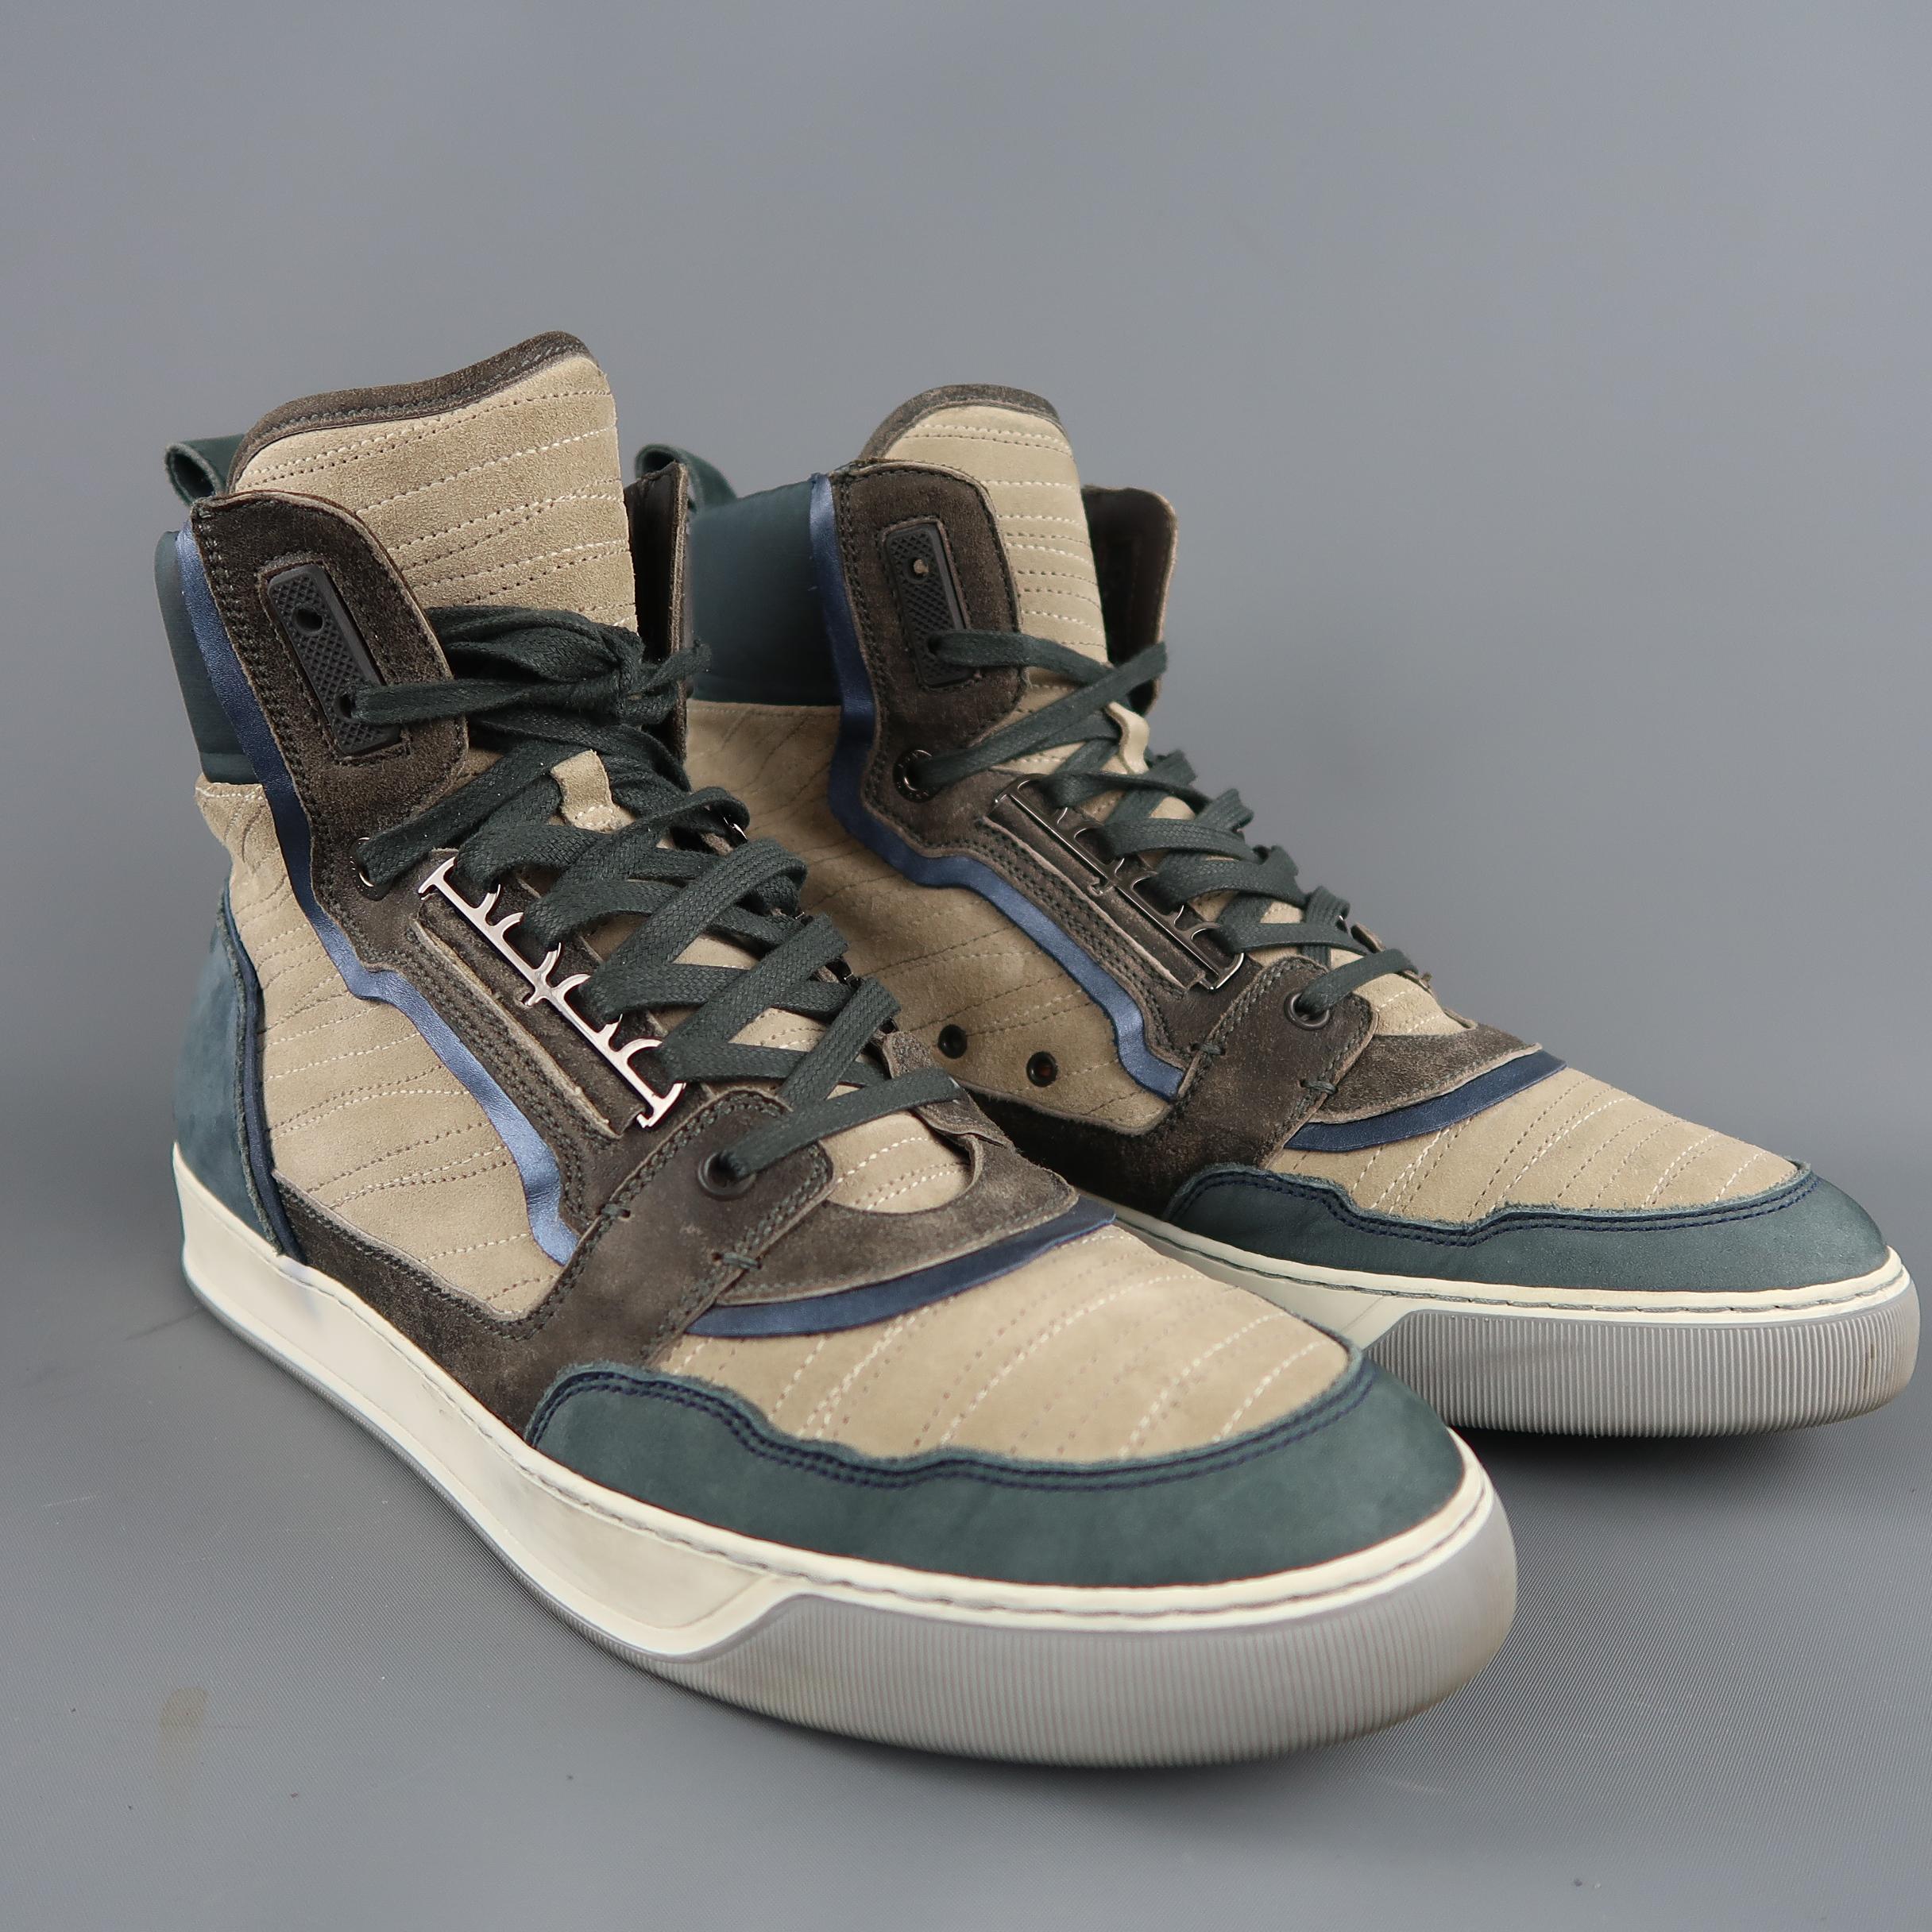 LANVIN high top sneakers come in beige suede with taupe suede accents, metallic navy blue leather piping, blue suede panels, satin ankle, and cream rubber sole. Made in Italy.
 
Good Pre-Owned Condition.
Marked: UK 11
 
Measurements:
 
Length: 12.5